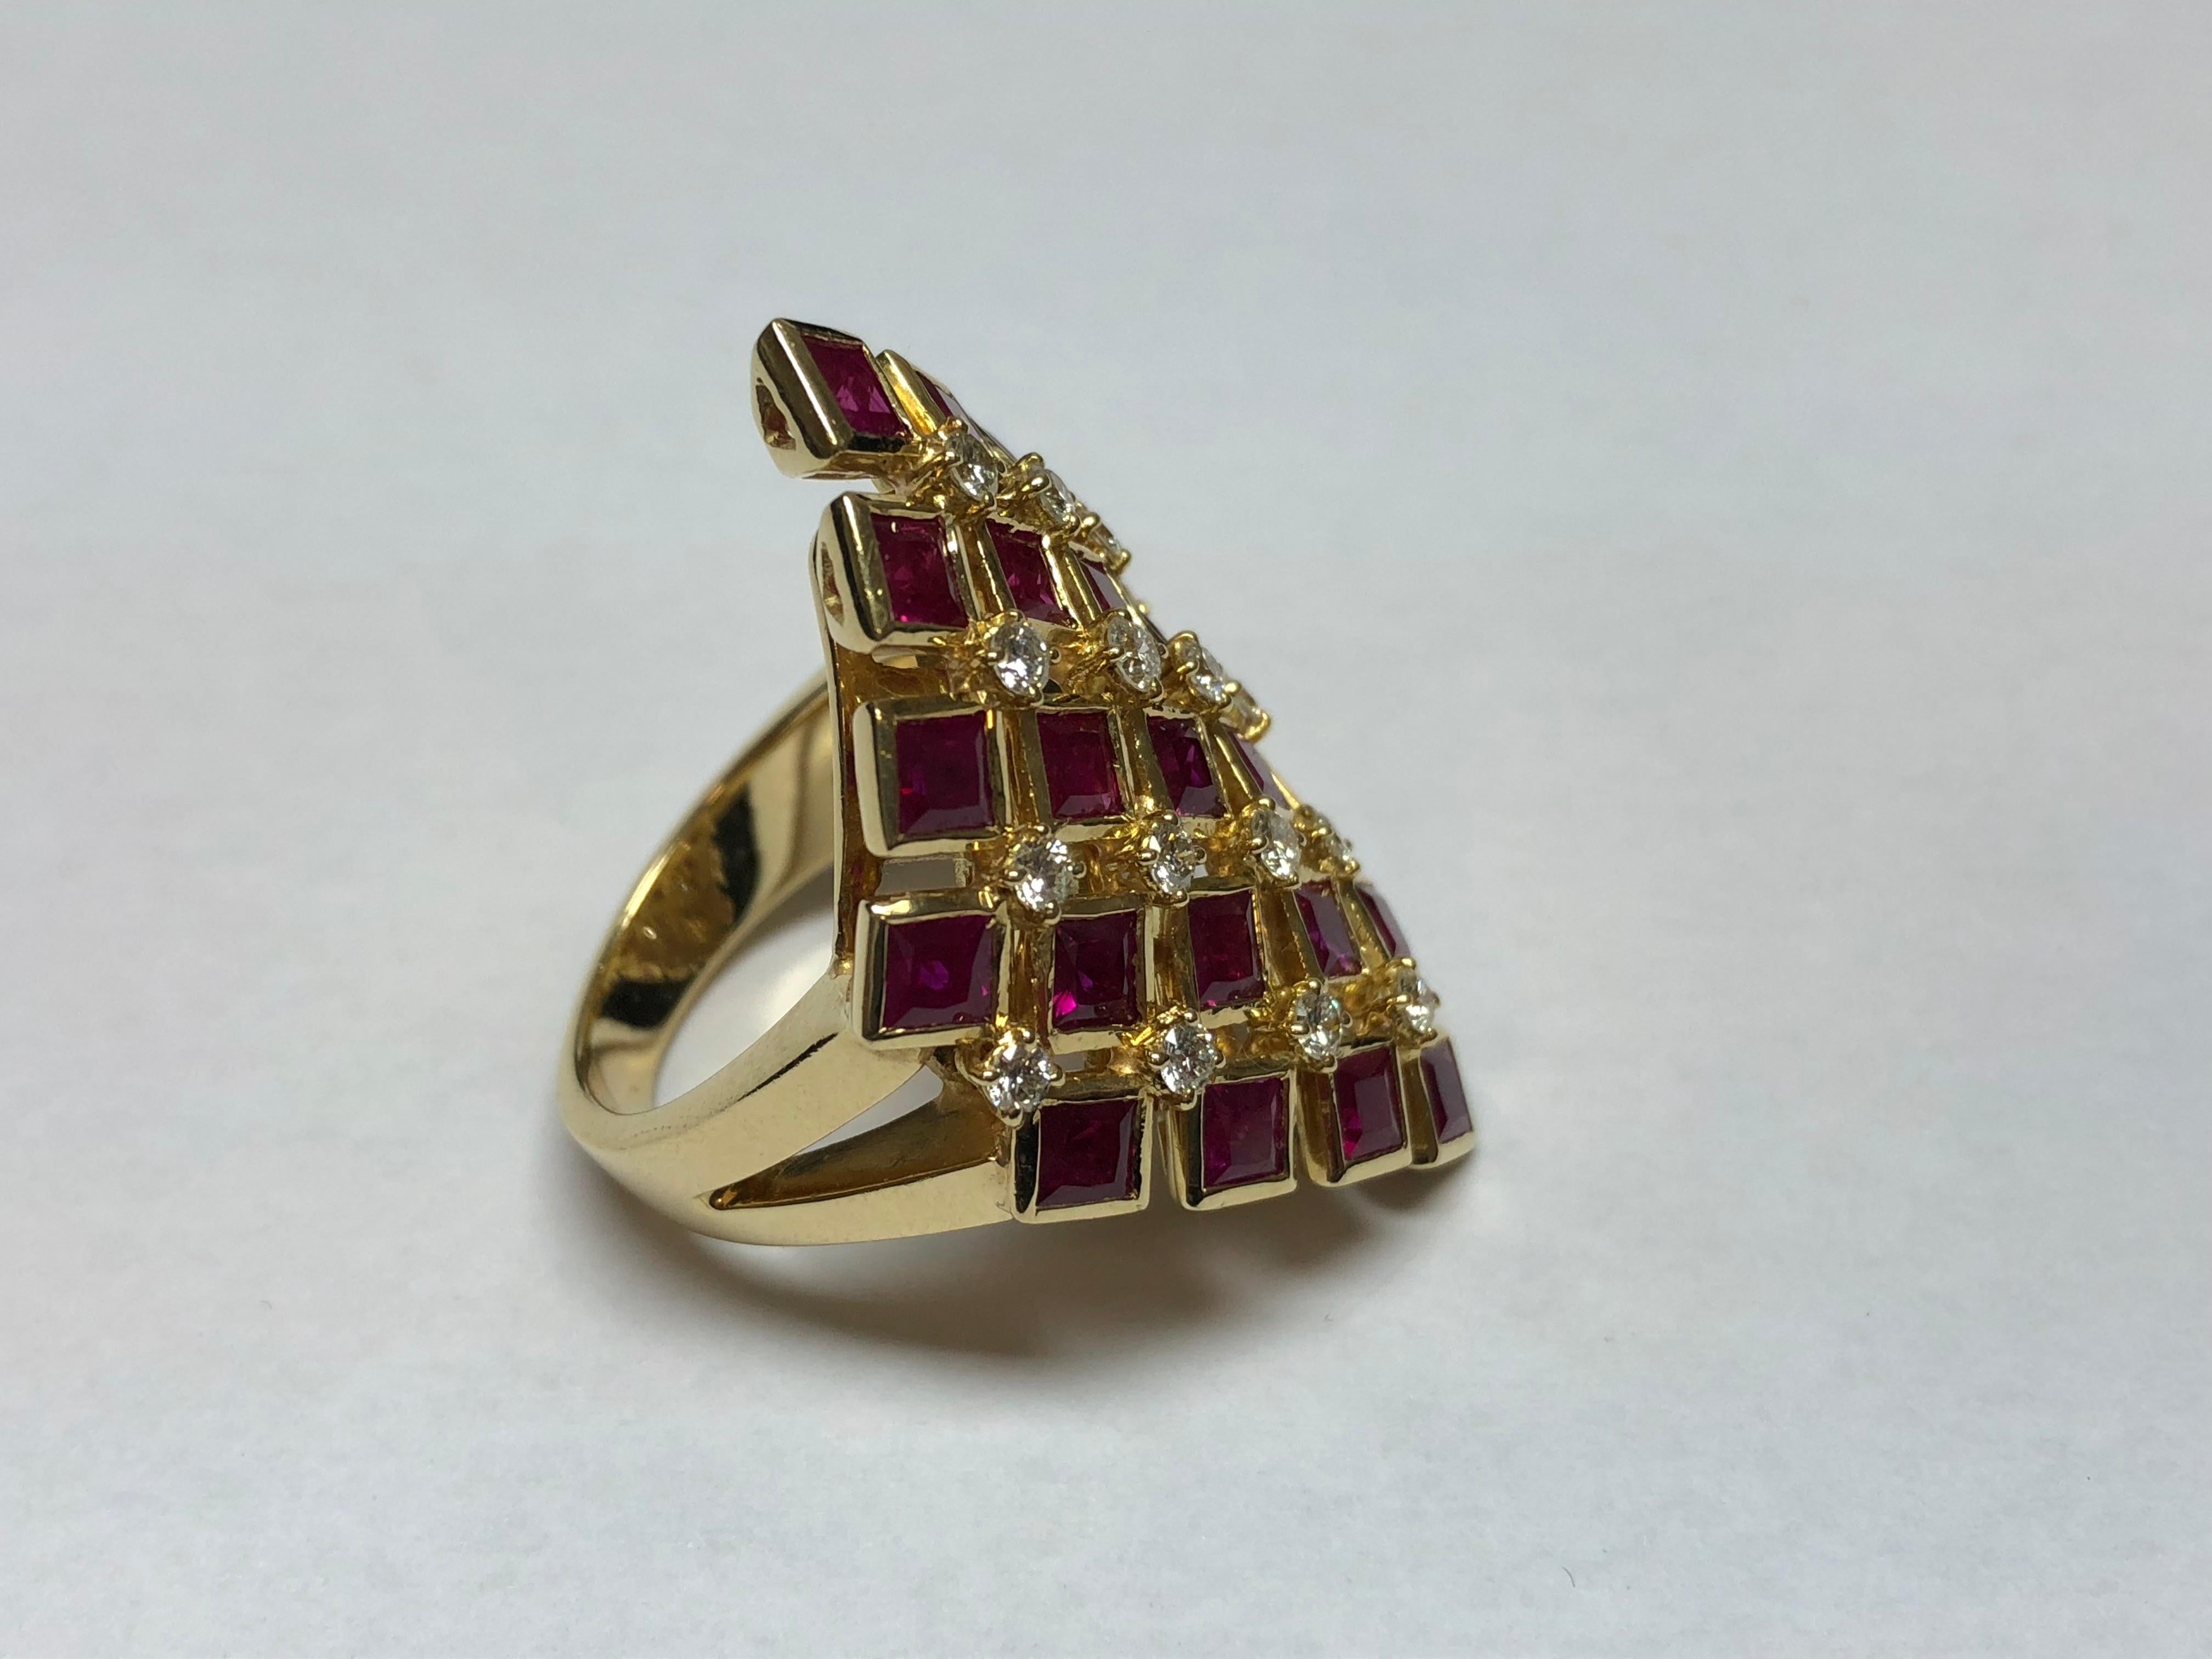 Amazing chess style jewelry gold ring,1.44ct Diamonds & 5.75ct Burmese rubies ring!

The ring is decorated with absolutely unique AAA Vivid Red 5.75ct CERTIFIED Burmese Rubies and by 1.44 ct 
Round Brilliant Cut Diamonds with the finest E-I